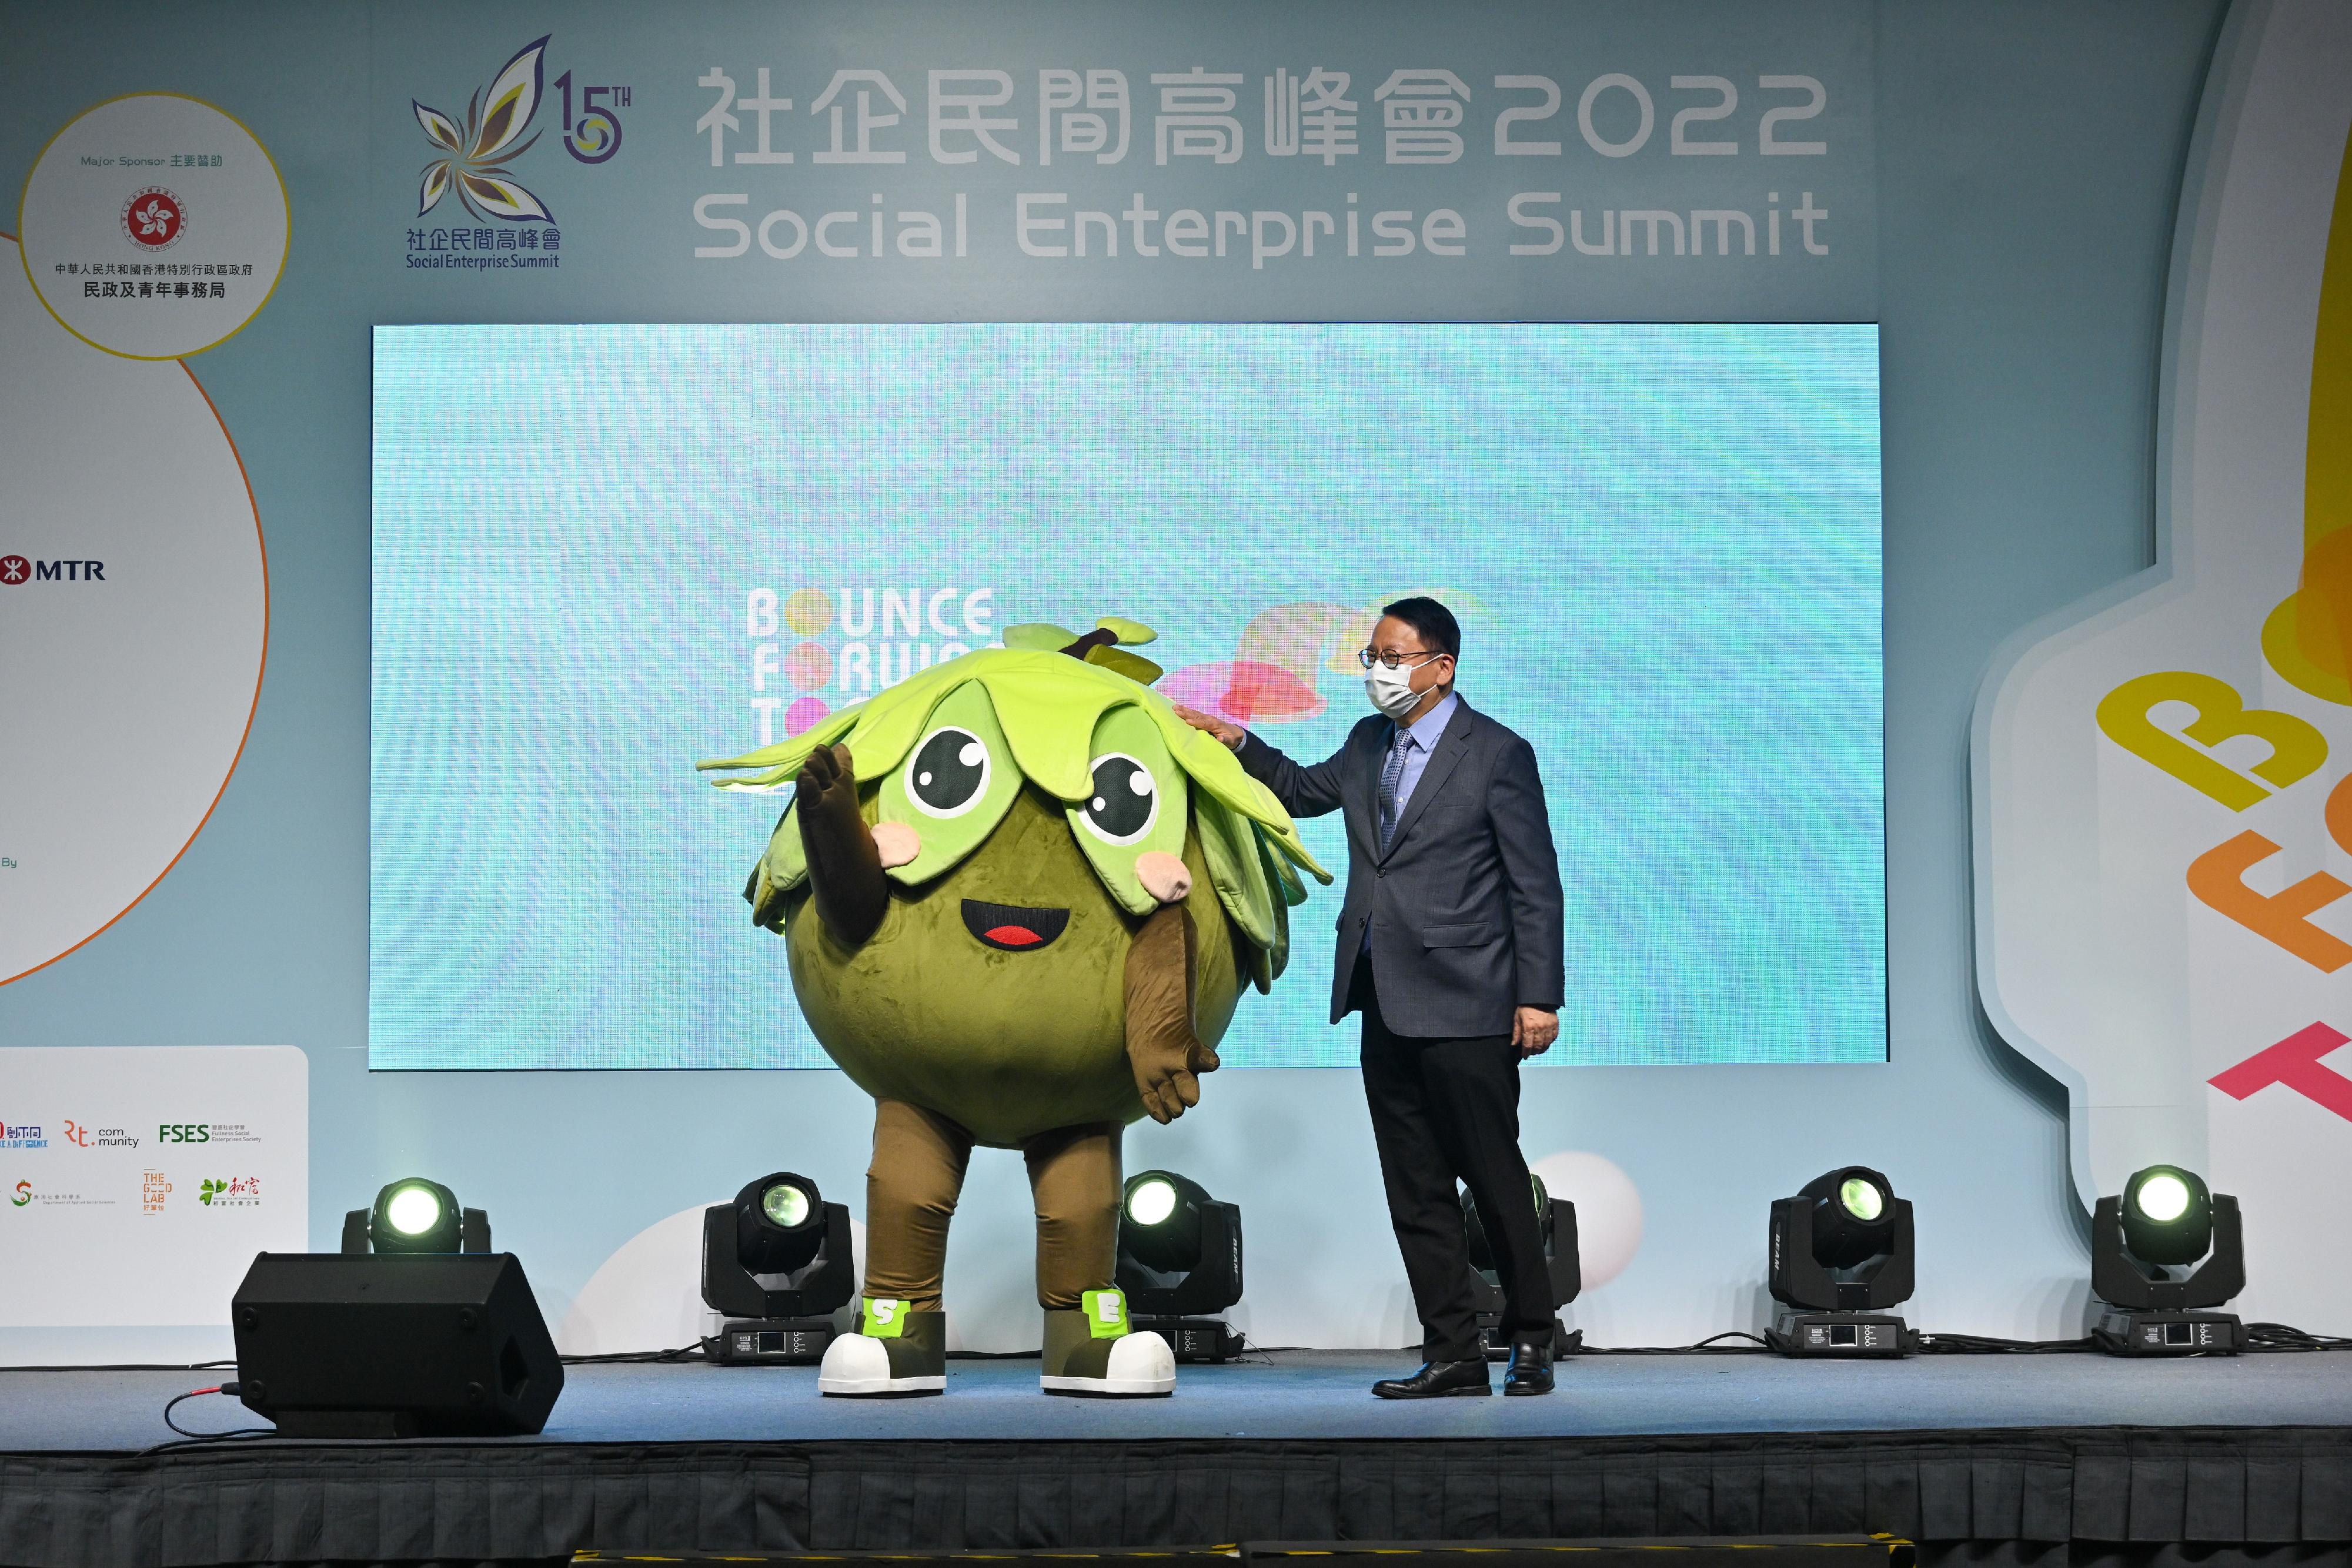 The Chief Secretary for Administration, Mr Chan Kwok-ki, attended the opening ceremony of the Social Enterprise Summit 2022 today (November 24). Photo shows Mr Chan and the social enterprise mascot Bloomy the Tree at the event.